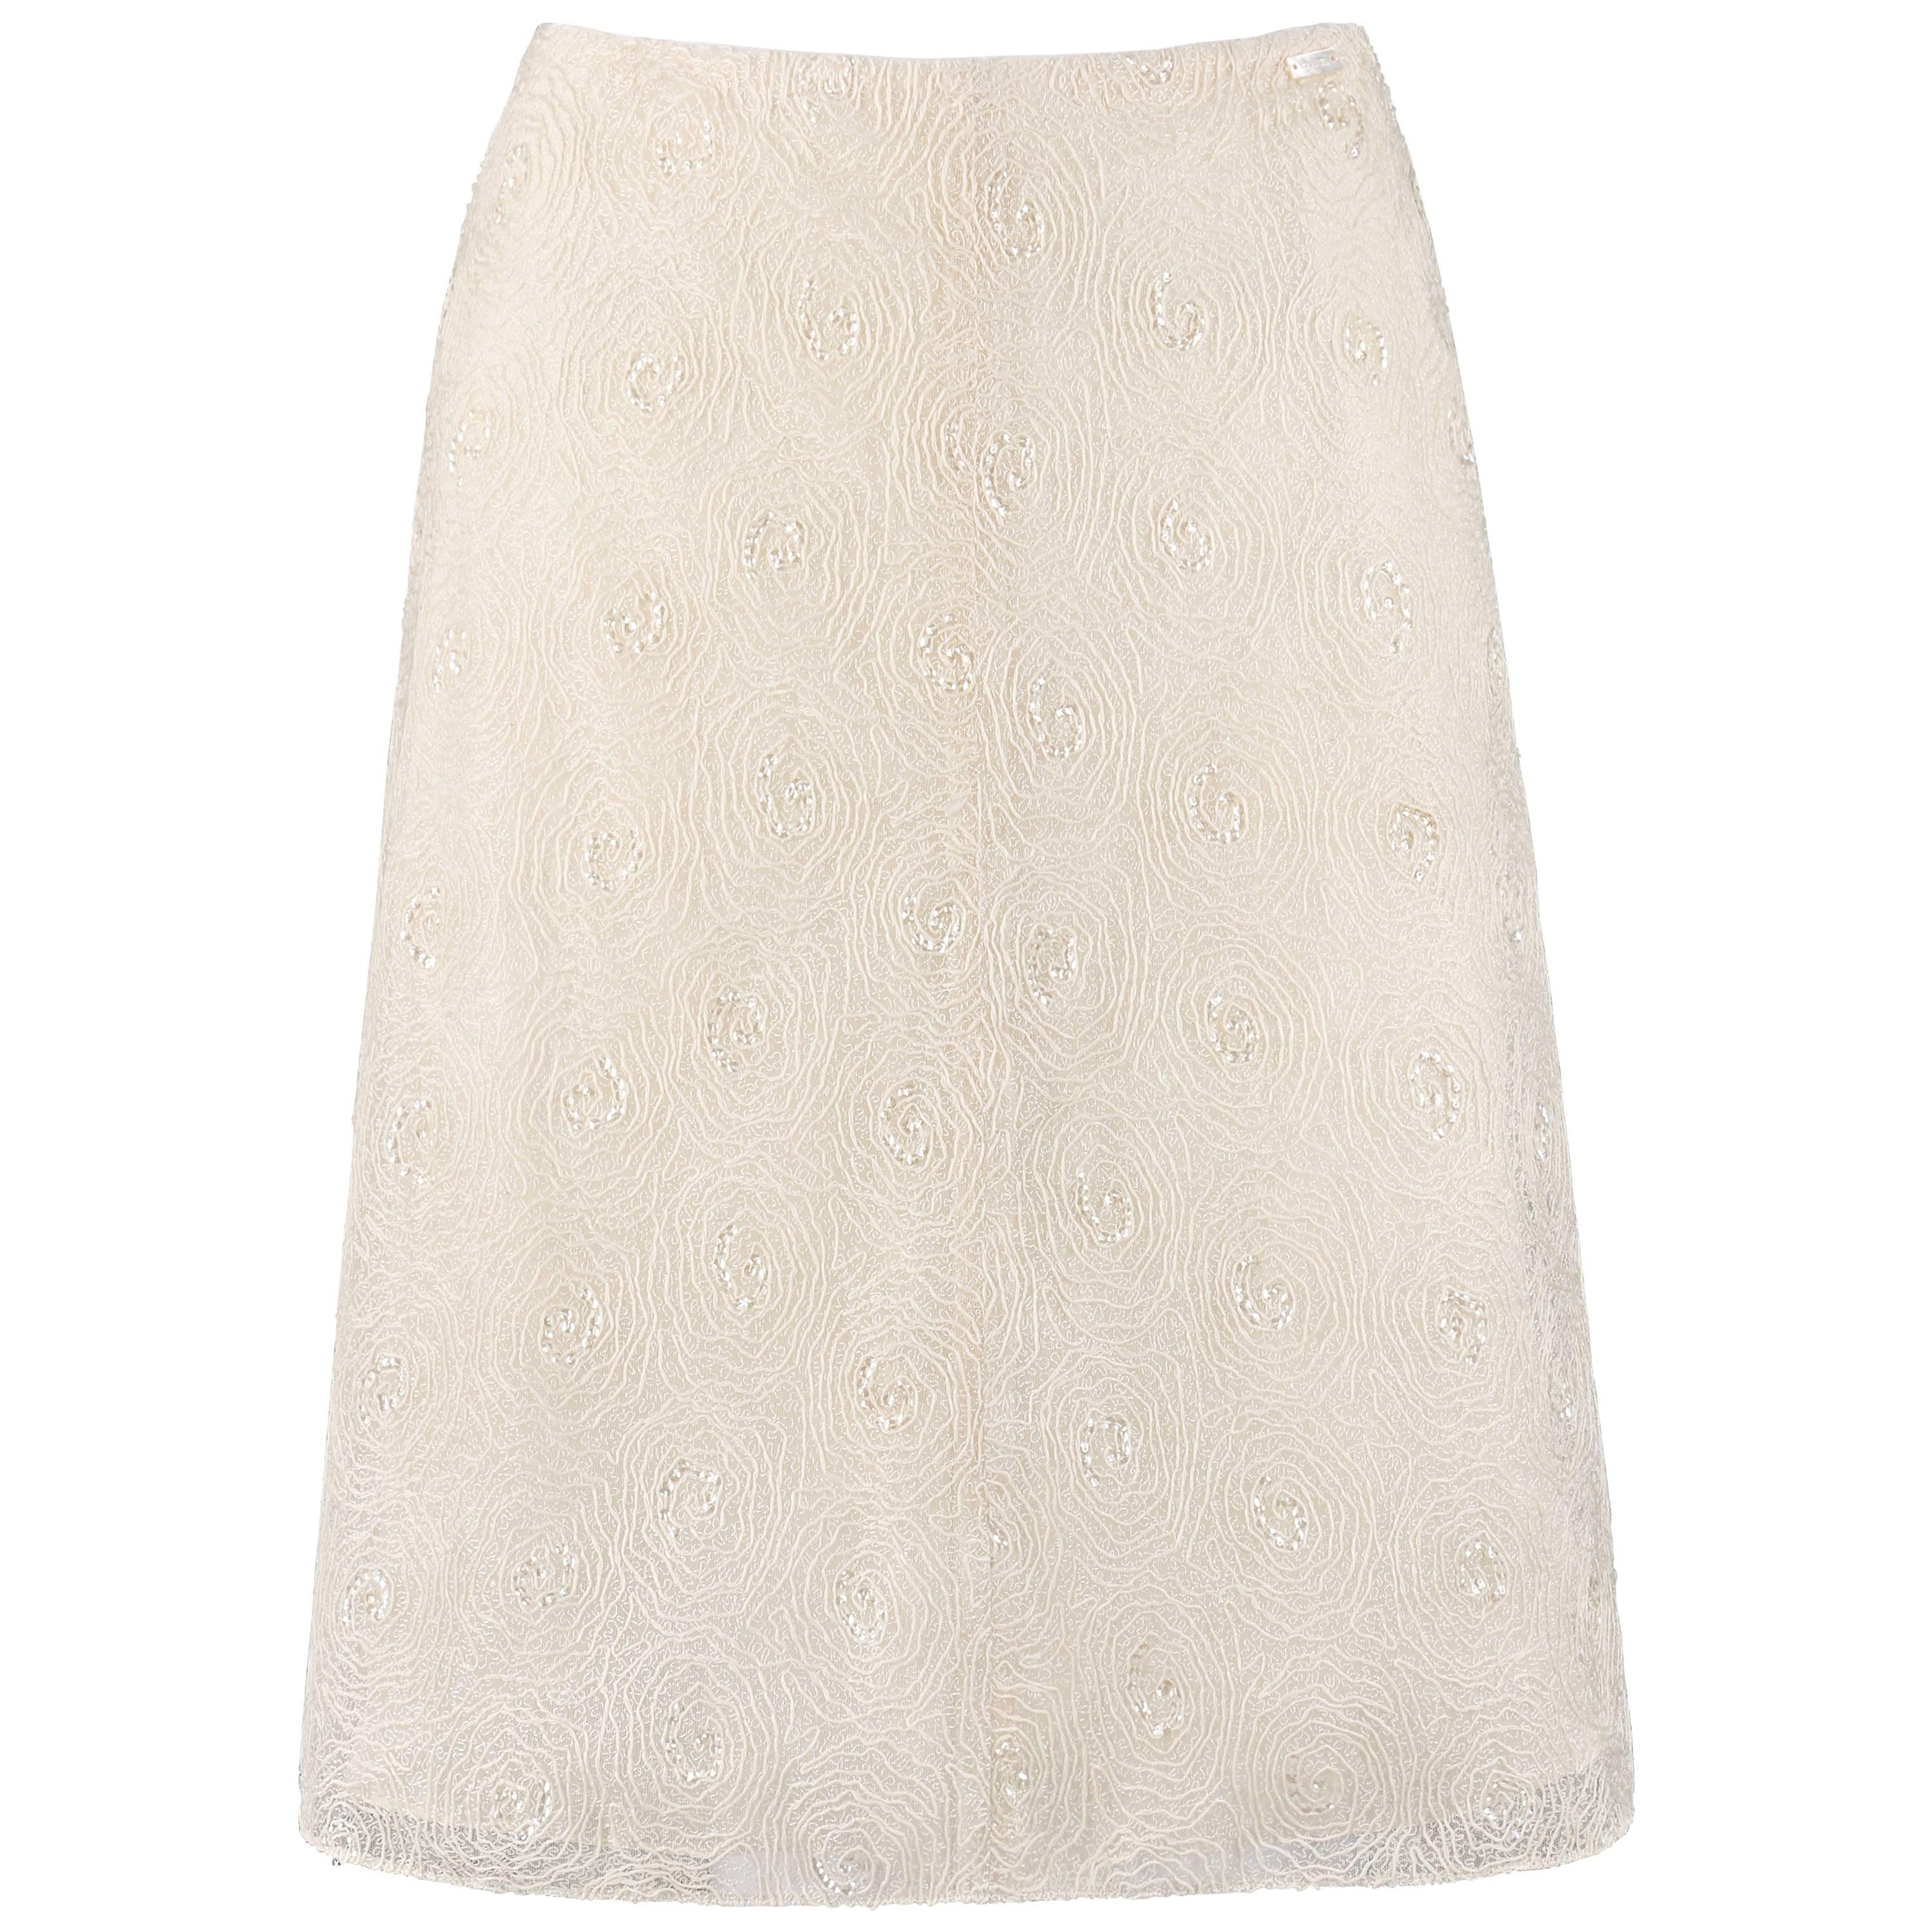 CHANEL S/S 2002 Cream Floral Embroidered Sequin Embellished Skirt 